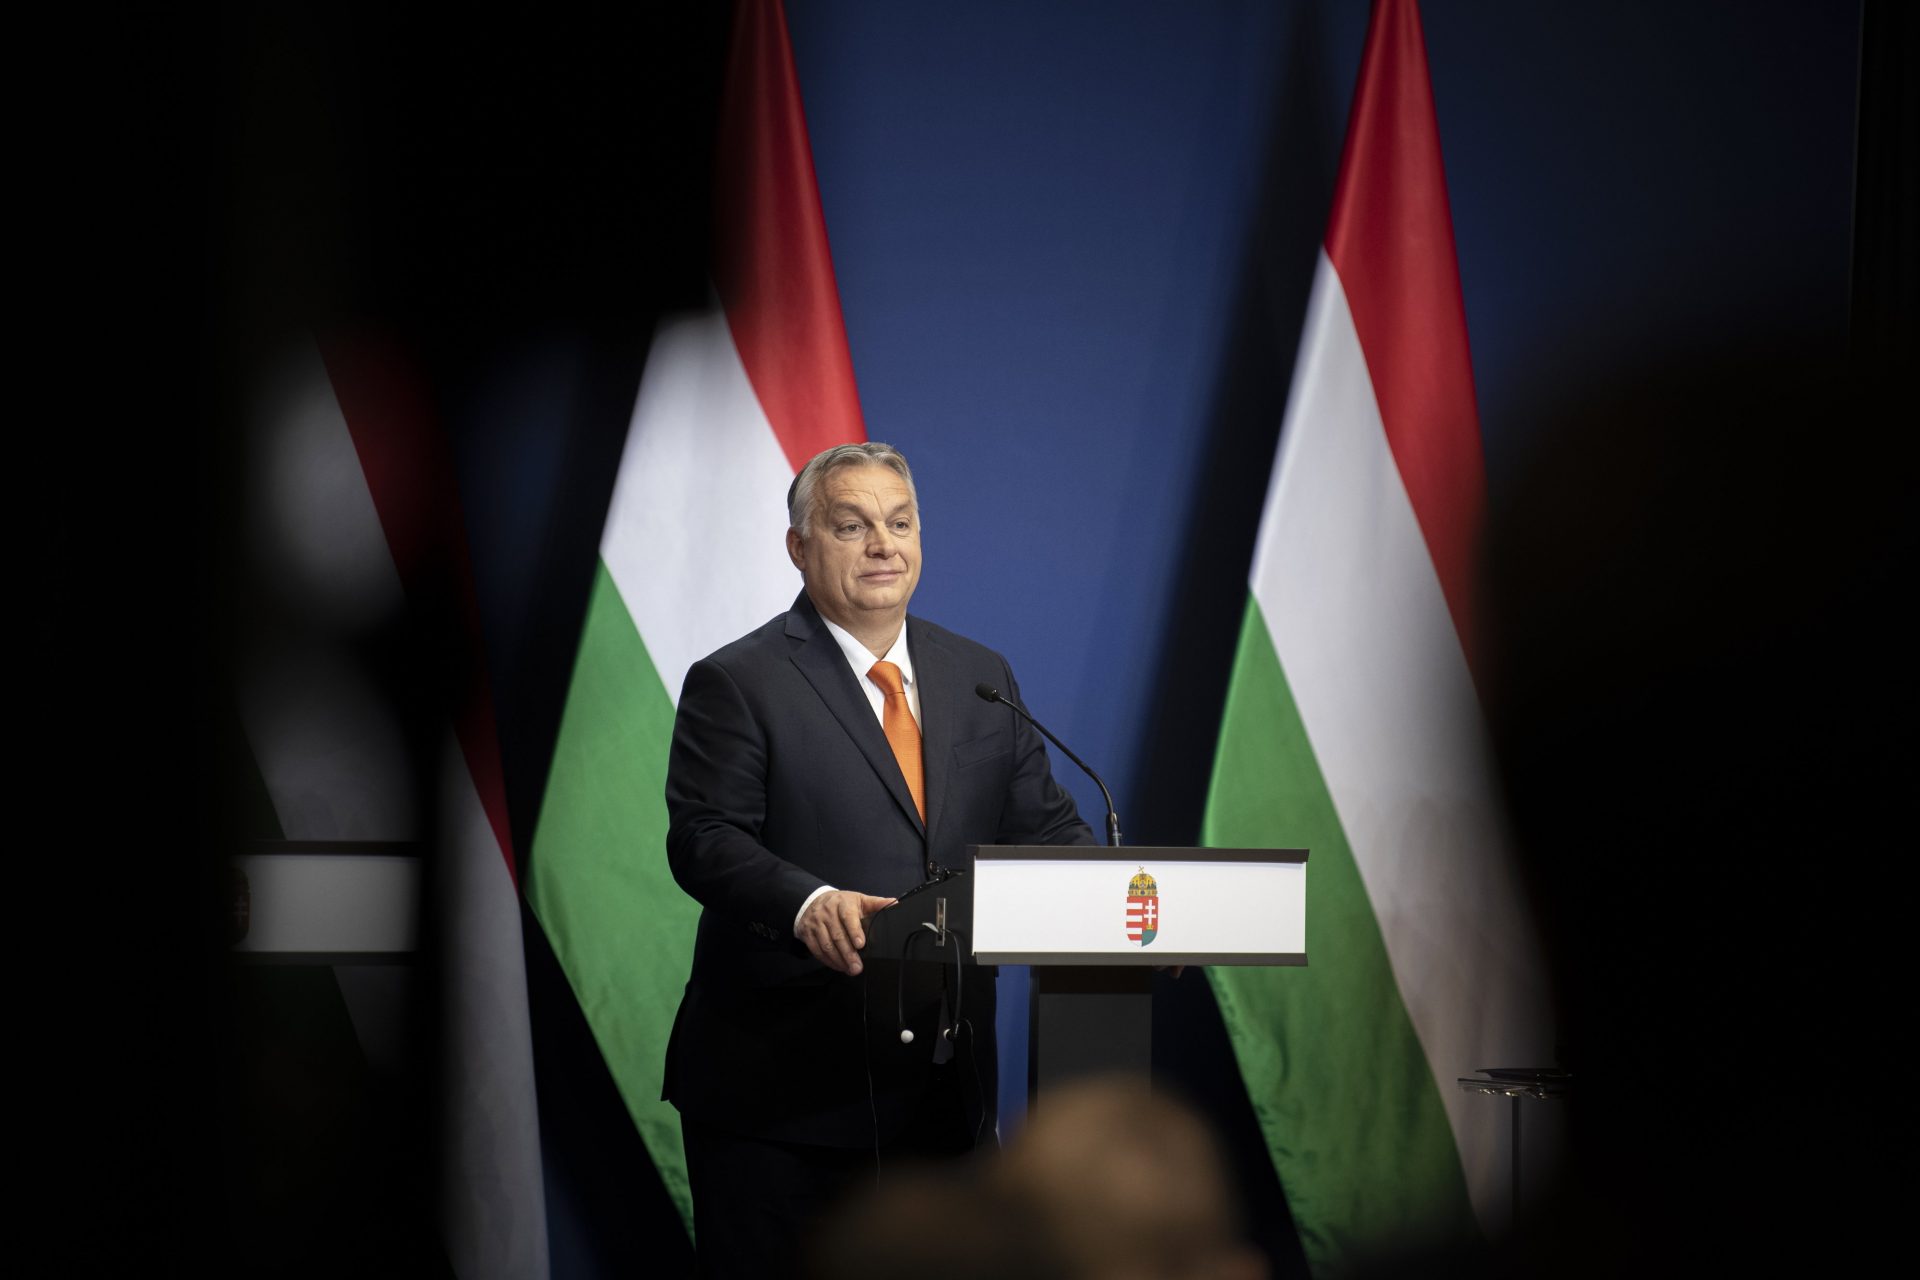 Orbán: Hungary stands by border protection practices